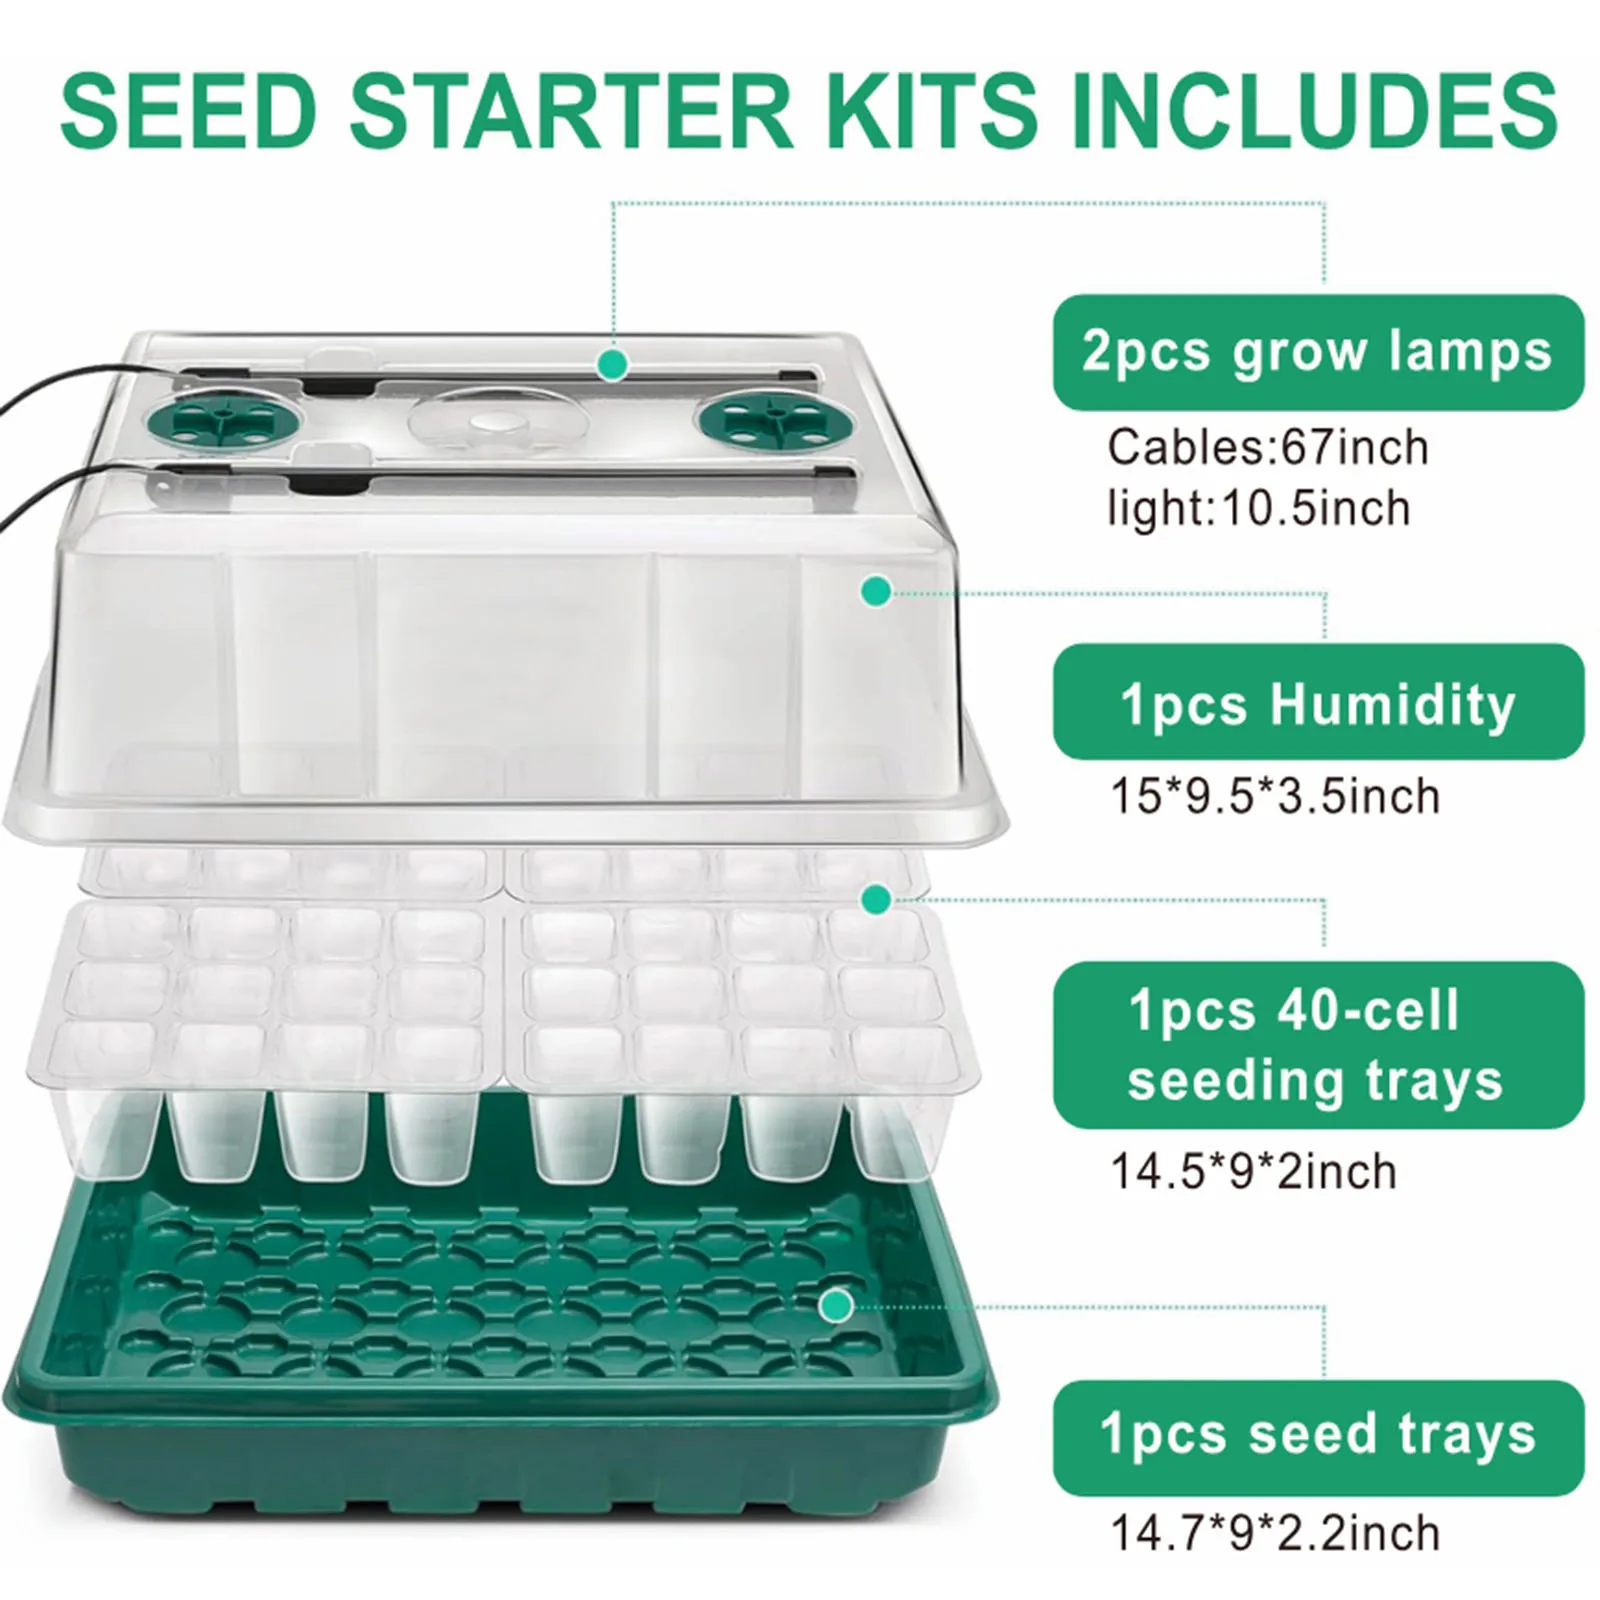 

Illuminated Seed Starter Tray Set Germination Trays with Grow Light for Seedling Indoor Gardening Hydroponic Growing Microgreens